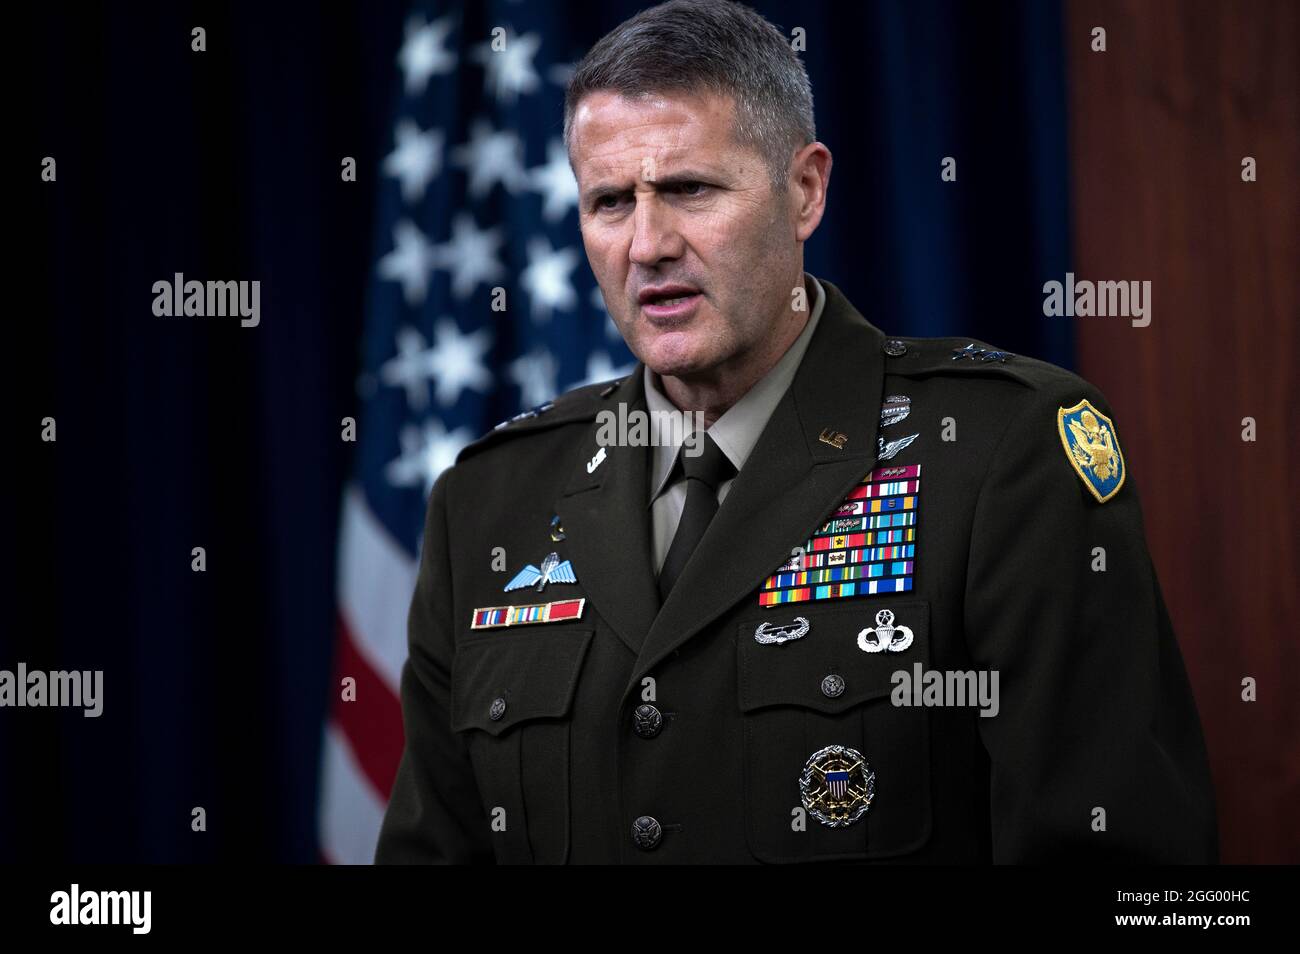 Arlington, United States Of America. 27th Aug, 2021. U.S. Army Maj. Gen. Hank Taylor, Joint Staff deputy director for regional operations, speaks at a press briefing on Afghanistan at the Pentagon August 27, 2021 in Arlington, Virginia. The Pentagon said that the Taliban released thousands of prisoners, including members of the Islamic State Khorasan terror group that attacked the Kabul evacuation. Credit: Planetpix/Alamy Live News Stock Photo